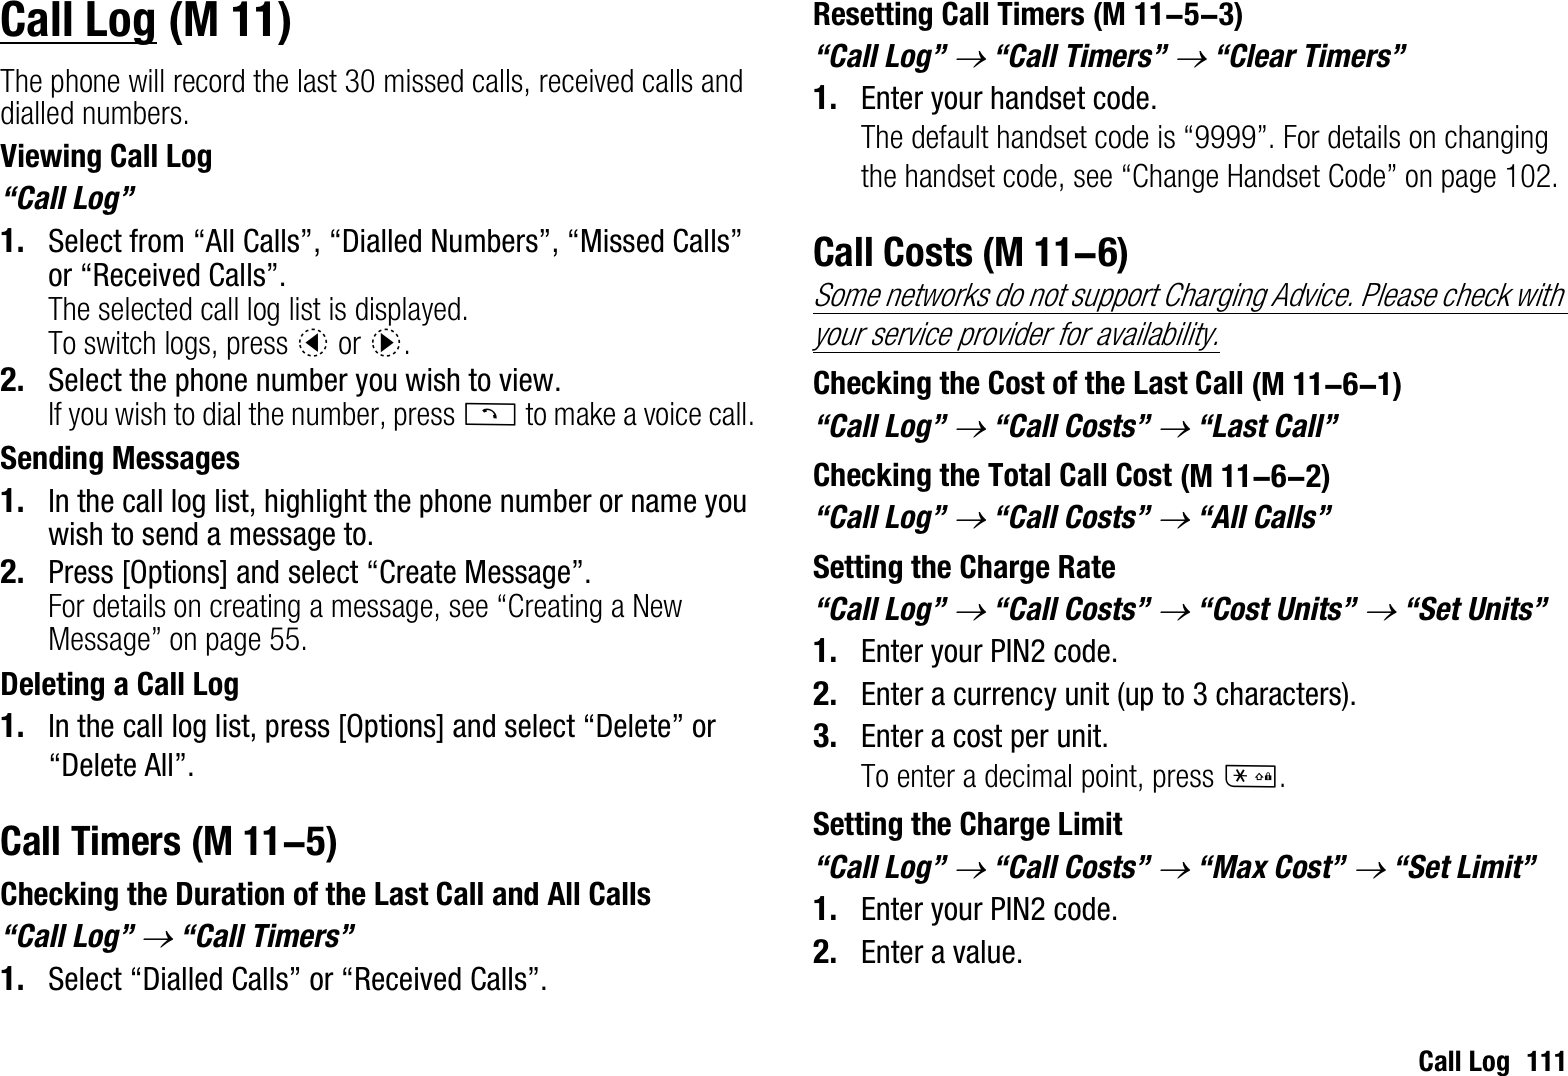 Call Log 111Call LogThe phone will record the last 30 missed calls, received calls and dialled numbers.Viewing Call Log“Call Log”1. Select from “All Calls”, “Dialled Numbers”, “Missed Calls” or “Received Calls”.The selected call log list is displayed.To switch logs, press c or d.2. Select the phone number you wish to view.If you wish to dial the number, press D to make a voice call.Sending Messages1. In the call log list, highlight the phone number or name you wish to send a message to.2. Press [Options] and select “Create Message”.For details on creating a message, see “Creating a New Message” on page 55.Deleting a Call Log1. In the call log list, press [Options] and select “Delete” or “Delete All”.Call TimersChecking the Duration of the Last Call and All Calls“Call Log” o “Call Timers”1. Select “Dialled Calls” or “Received Calls”.Resetting Call Timers“Call Log” o “Call Timers” o “Clear Timers”1. Enter your handset code.The default handset code is “9999”. For details on changing the handset code, see “Change Handset Code” on page 102.Call CostsSome networks do not support Charging Advice. Please check with your service provider for availability.Checking the Cost of the Last Call“Call Log” o “Call Costs” o “Last Call”Checking the Total Call Cost“Call Log” o “Call Costs” o “All Calls”Setting the Charge Rate“Call Log” o “Call Costs” o “Cost Units” o “Set Units”1. Enter your PIN2 code.2. Enter a currency unit (up to 3 characters).3. Enter a cost per unit.To enter a decimal point, press P.Setting the Charge Limit“Call Log” o “Call Costs” o “Max Cost” o “Set Limit”1. Enter your PIN2 code.2. Enter a value. (M 11) (M 11-5) (M 11-5-3) (M 11-6) (M 11-6-1) (M 11-6-2)